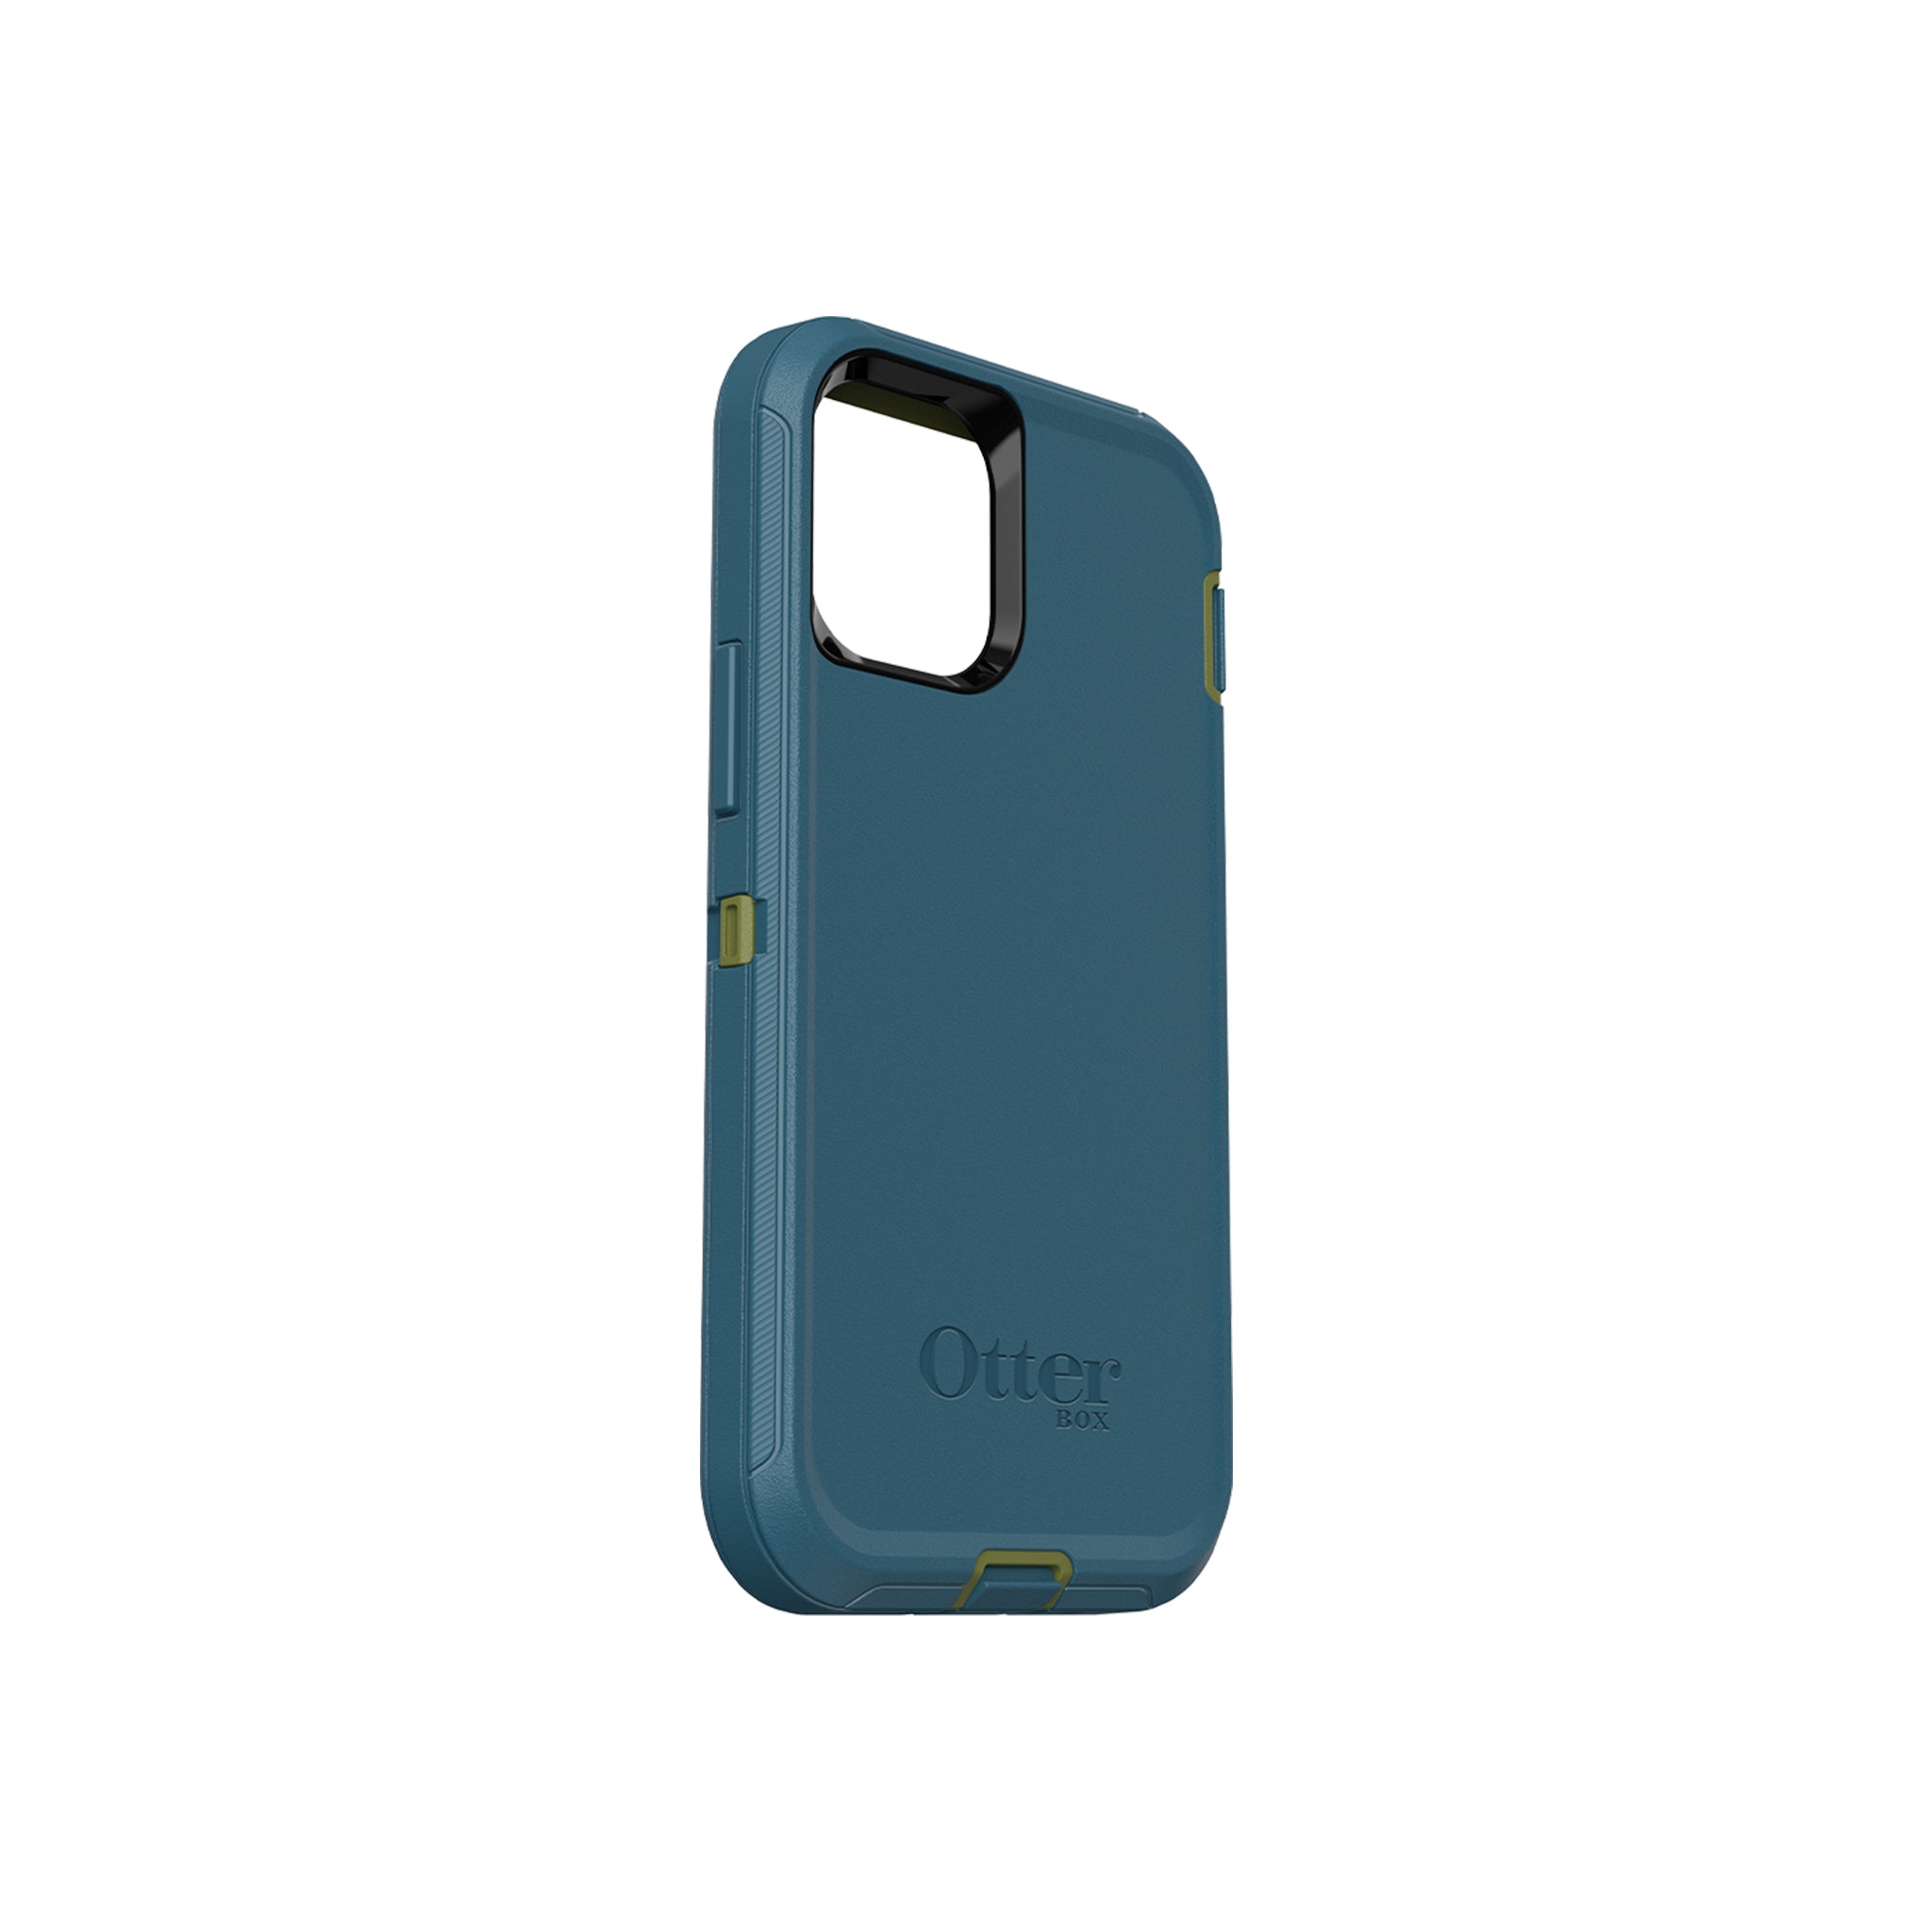 OtterBox - Defender for iPhone 12 mini - Teal me about it